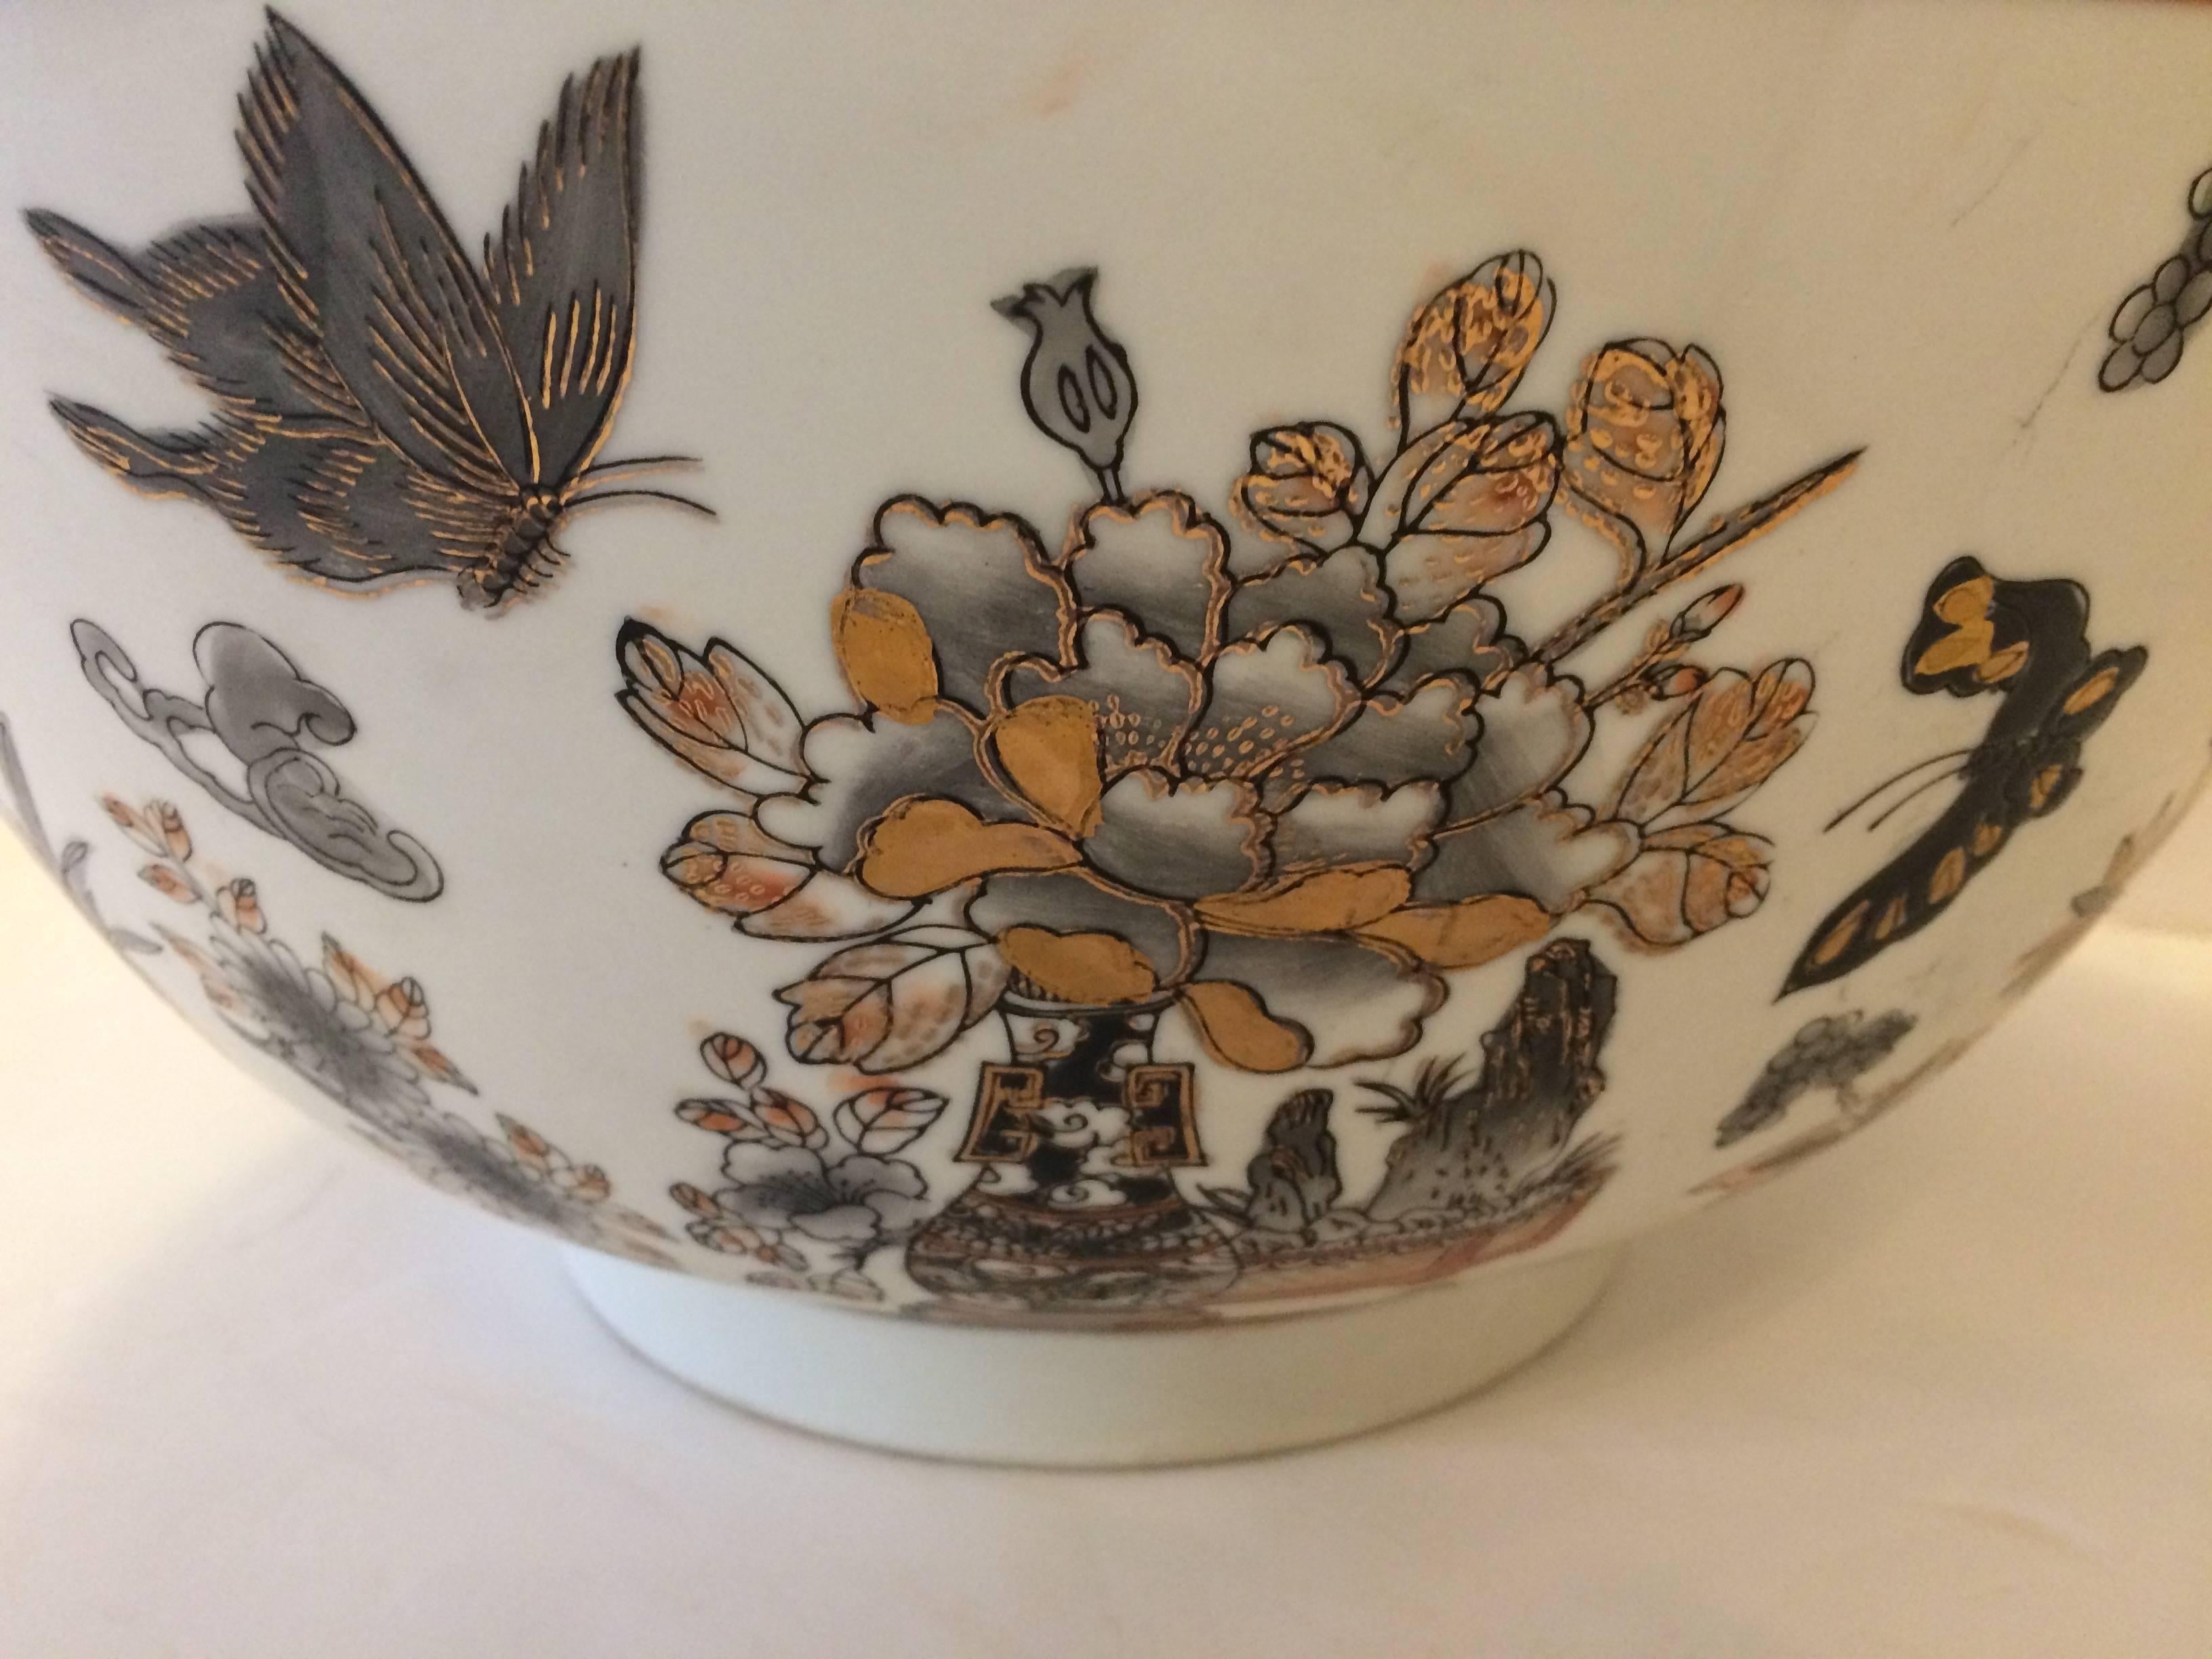 Chinese Export Magnificent Large Chinese Porcelain Center Bowl or Punch Bowl